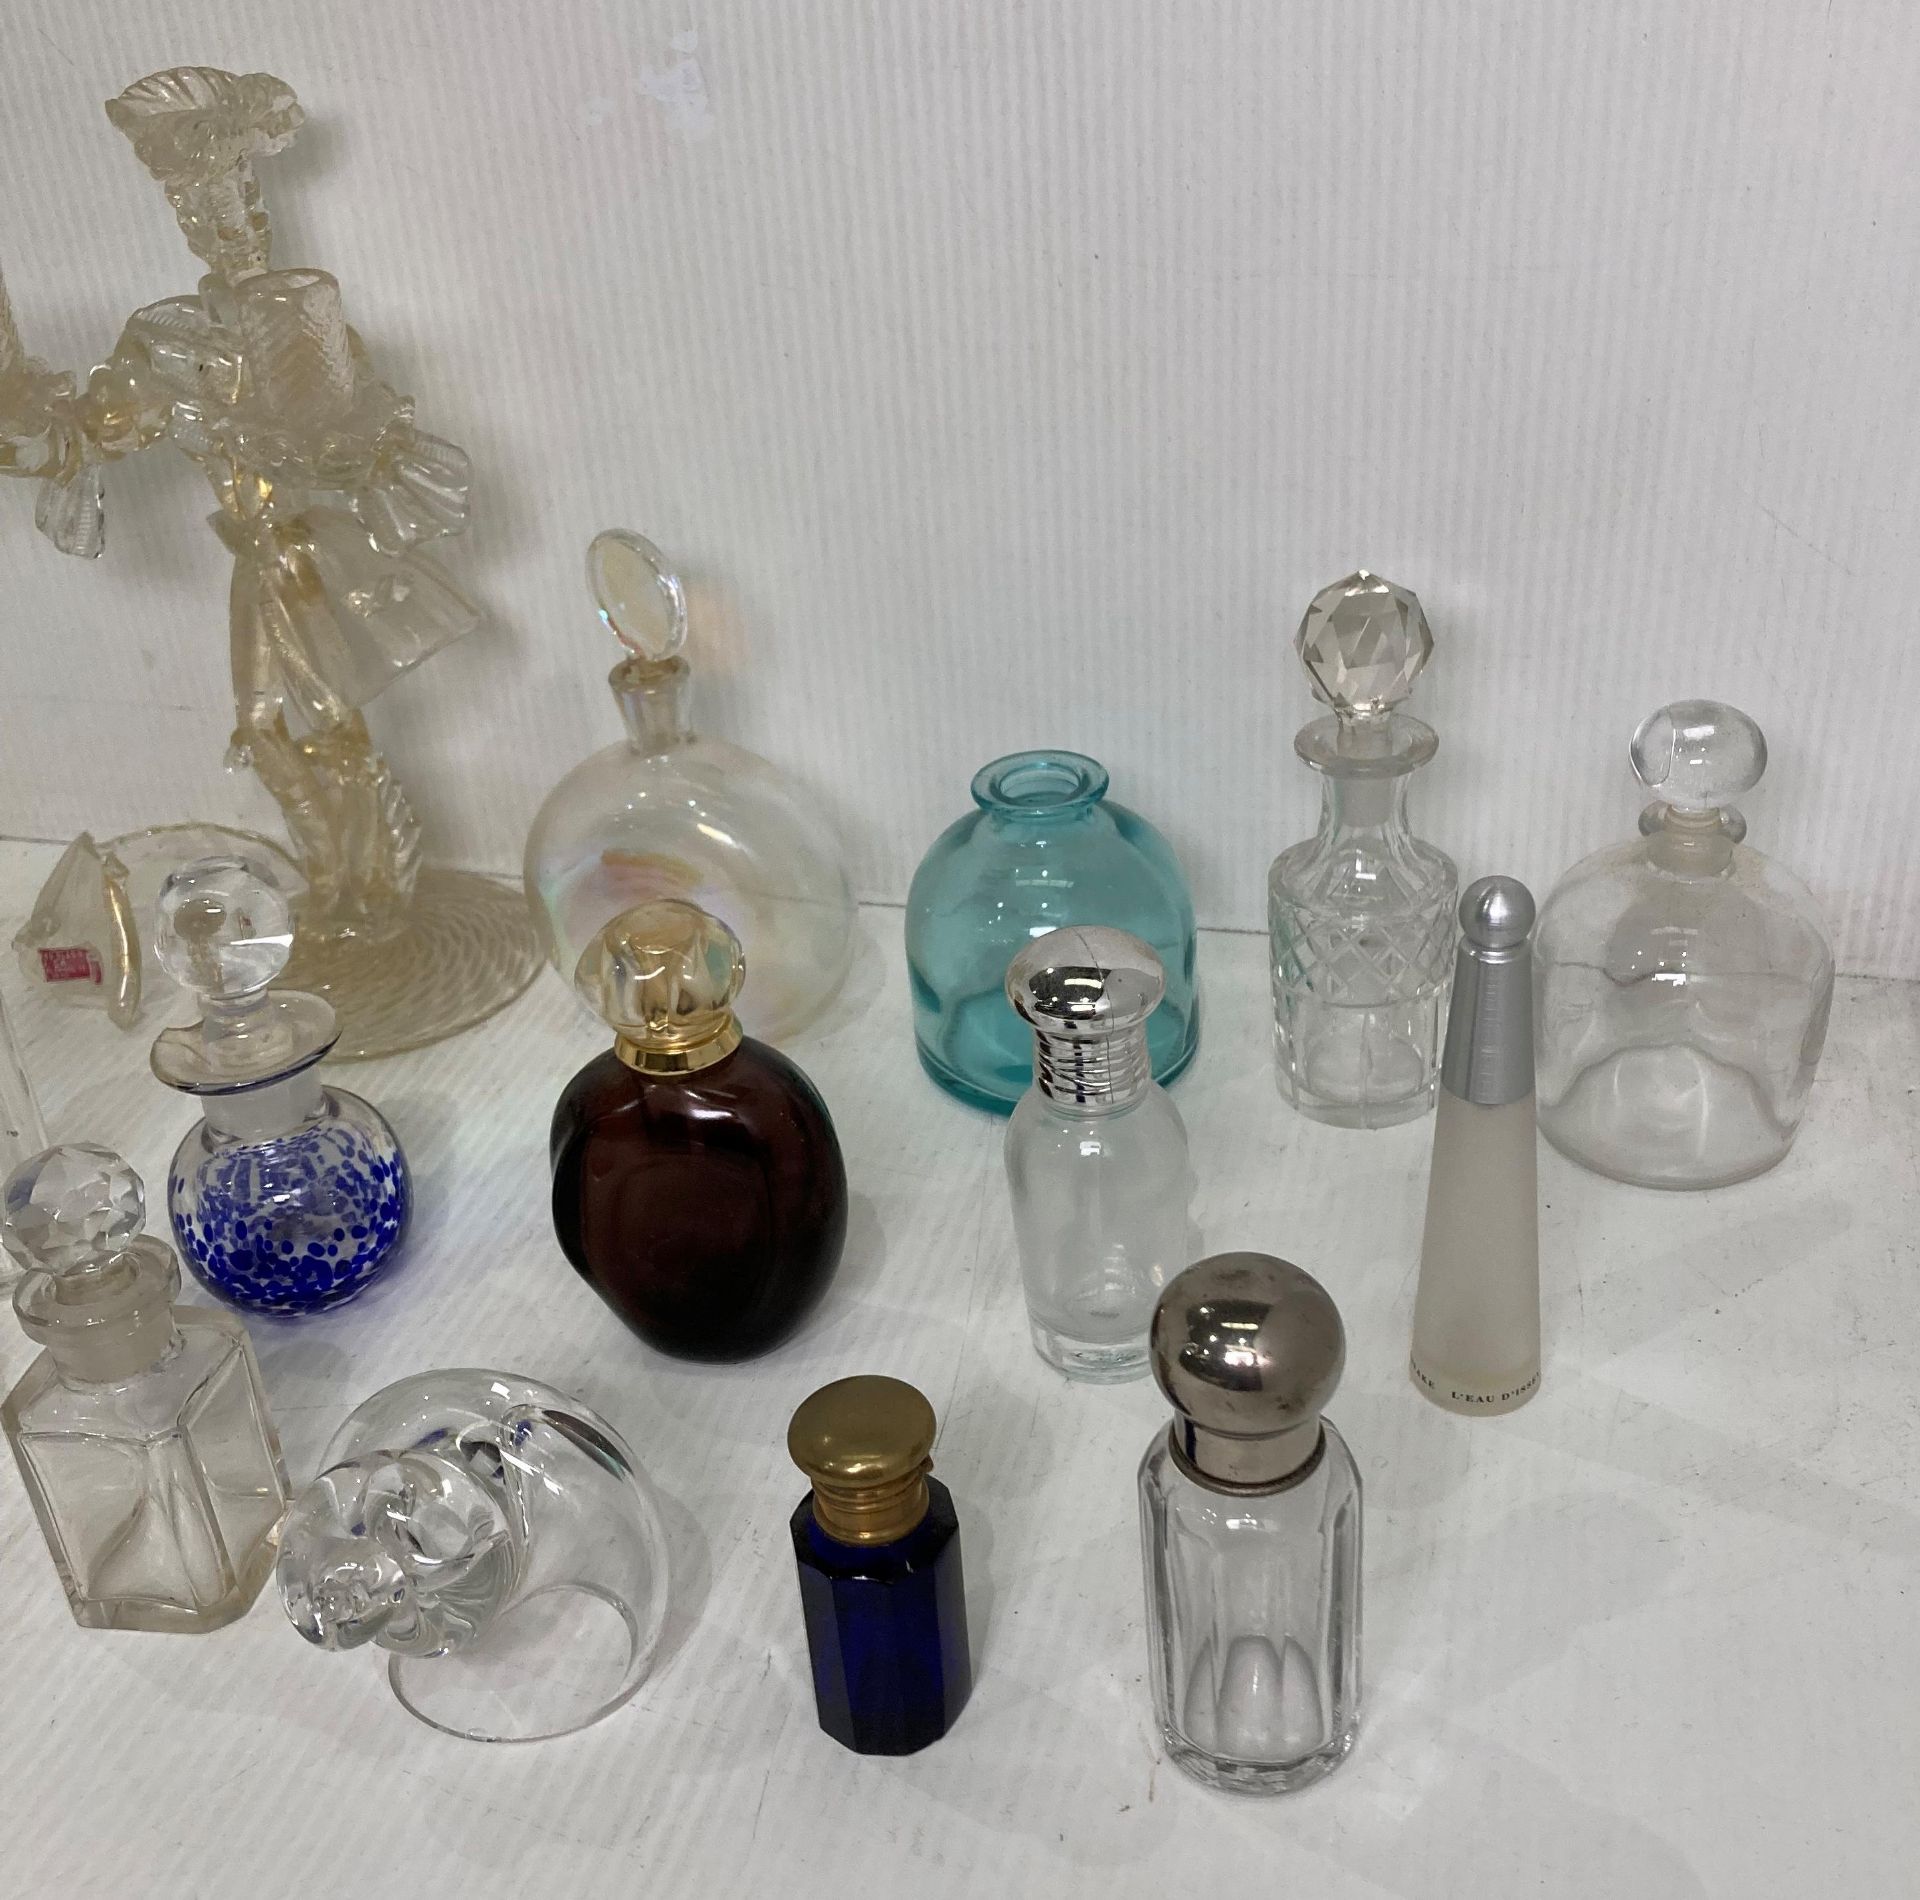 Thirteen assorted perfume bottles including vintage and modern pieces and a blown glass candelabra - Image 3 of 3